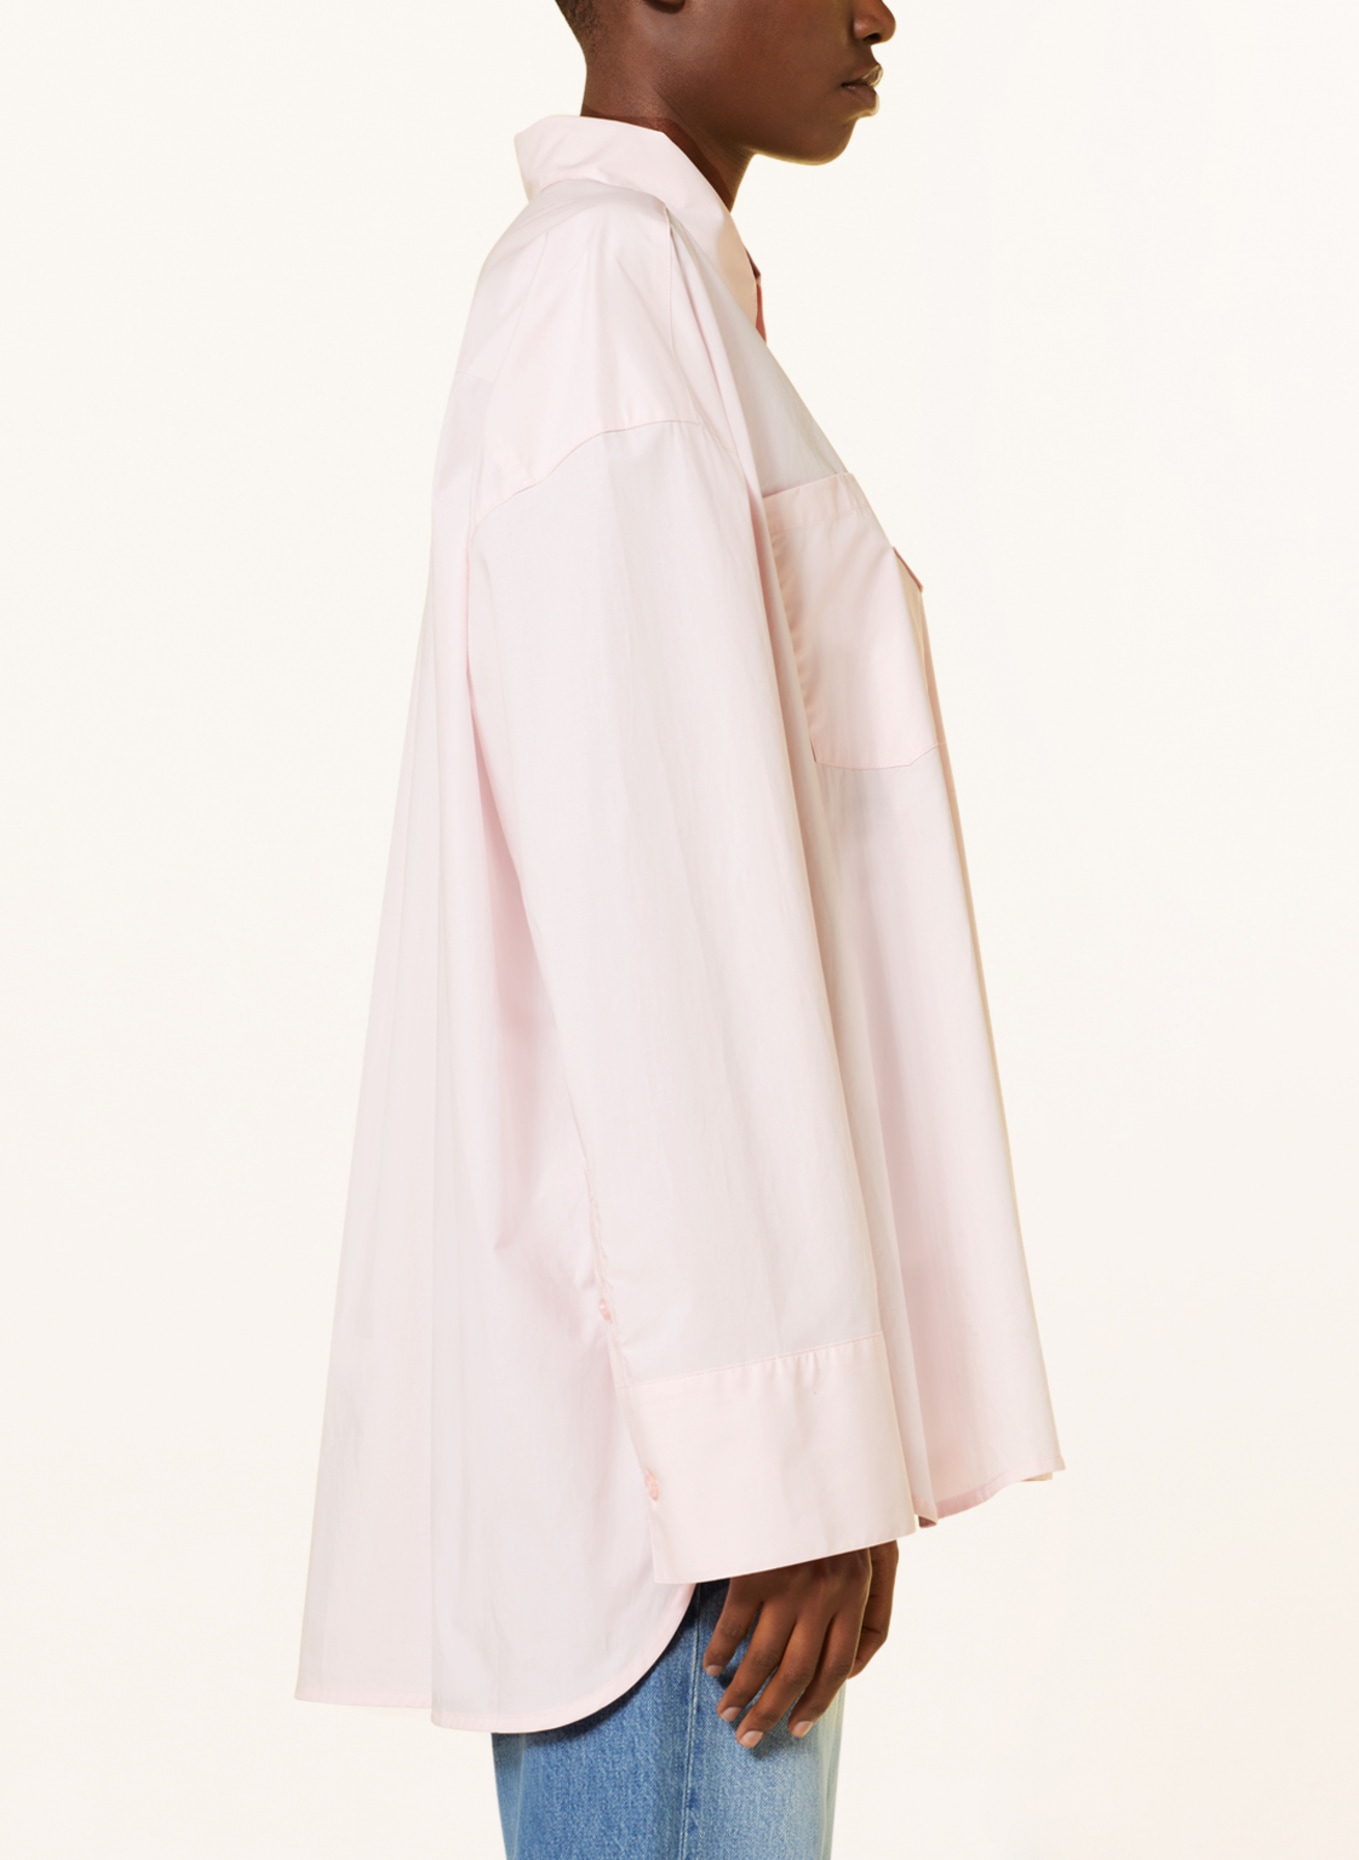 REMAIN Oversized shirt blouse, Color: LIGHT PINK (Image 4)